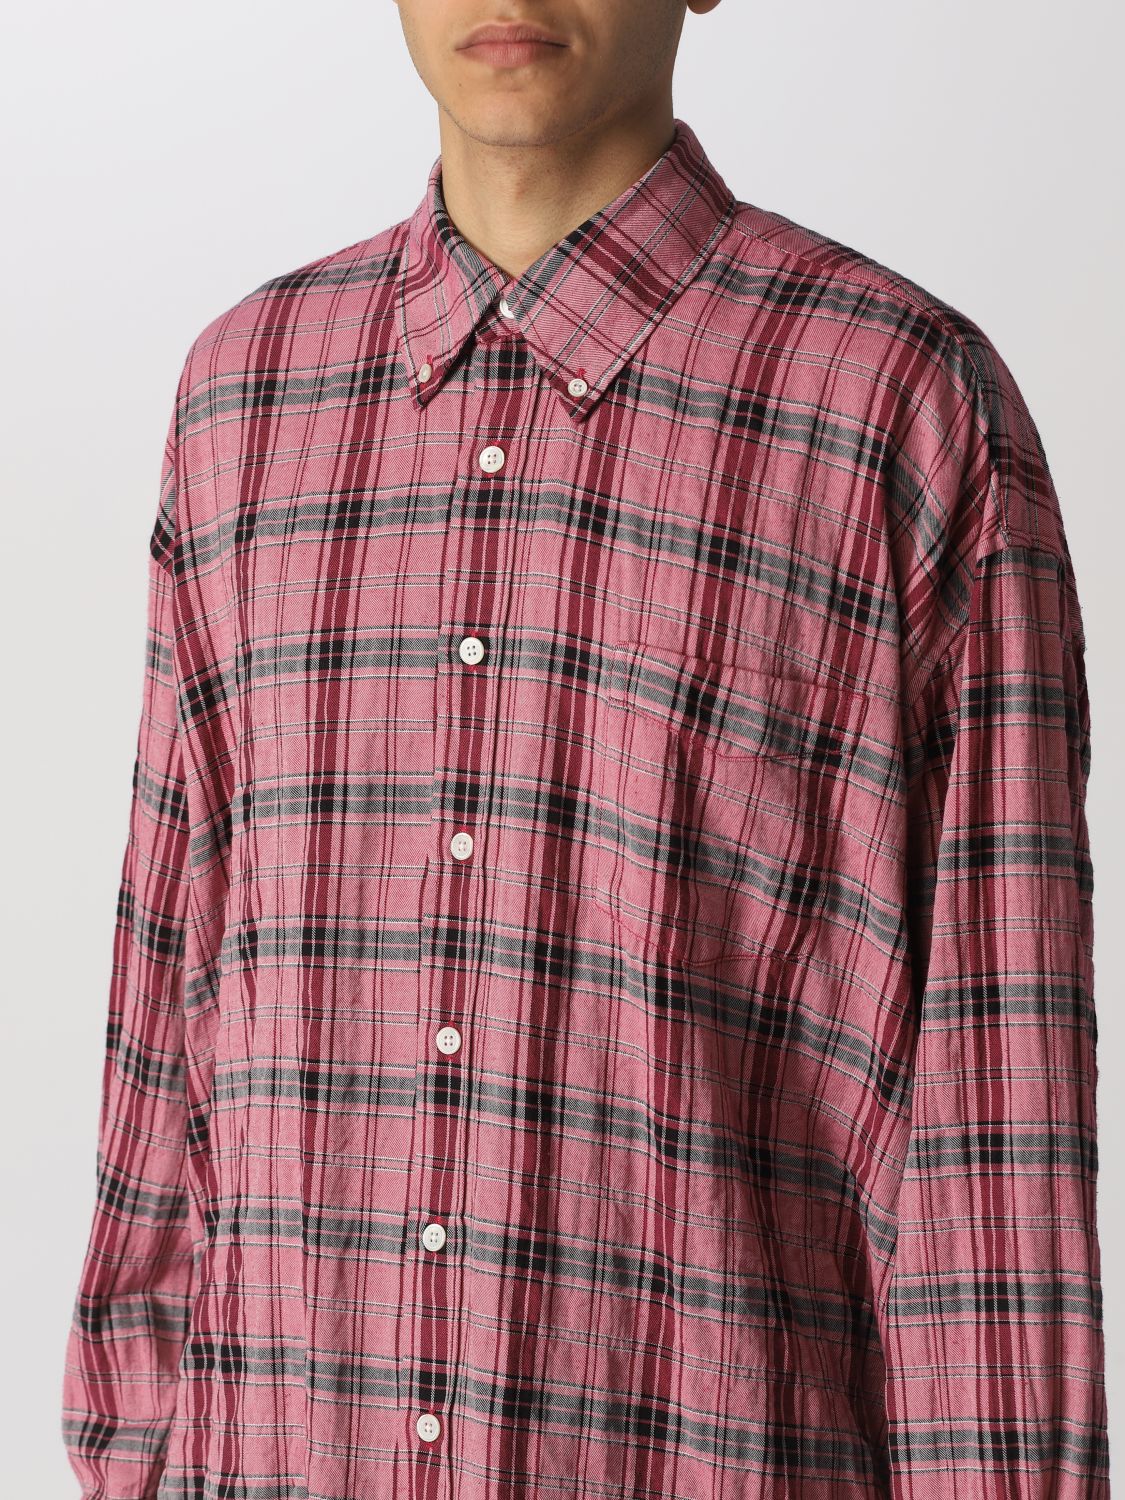 OUR LEGACY CHECK SHIRT ピンク チェックシャツ | www.myglobaltax.com